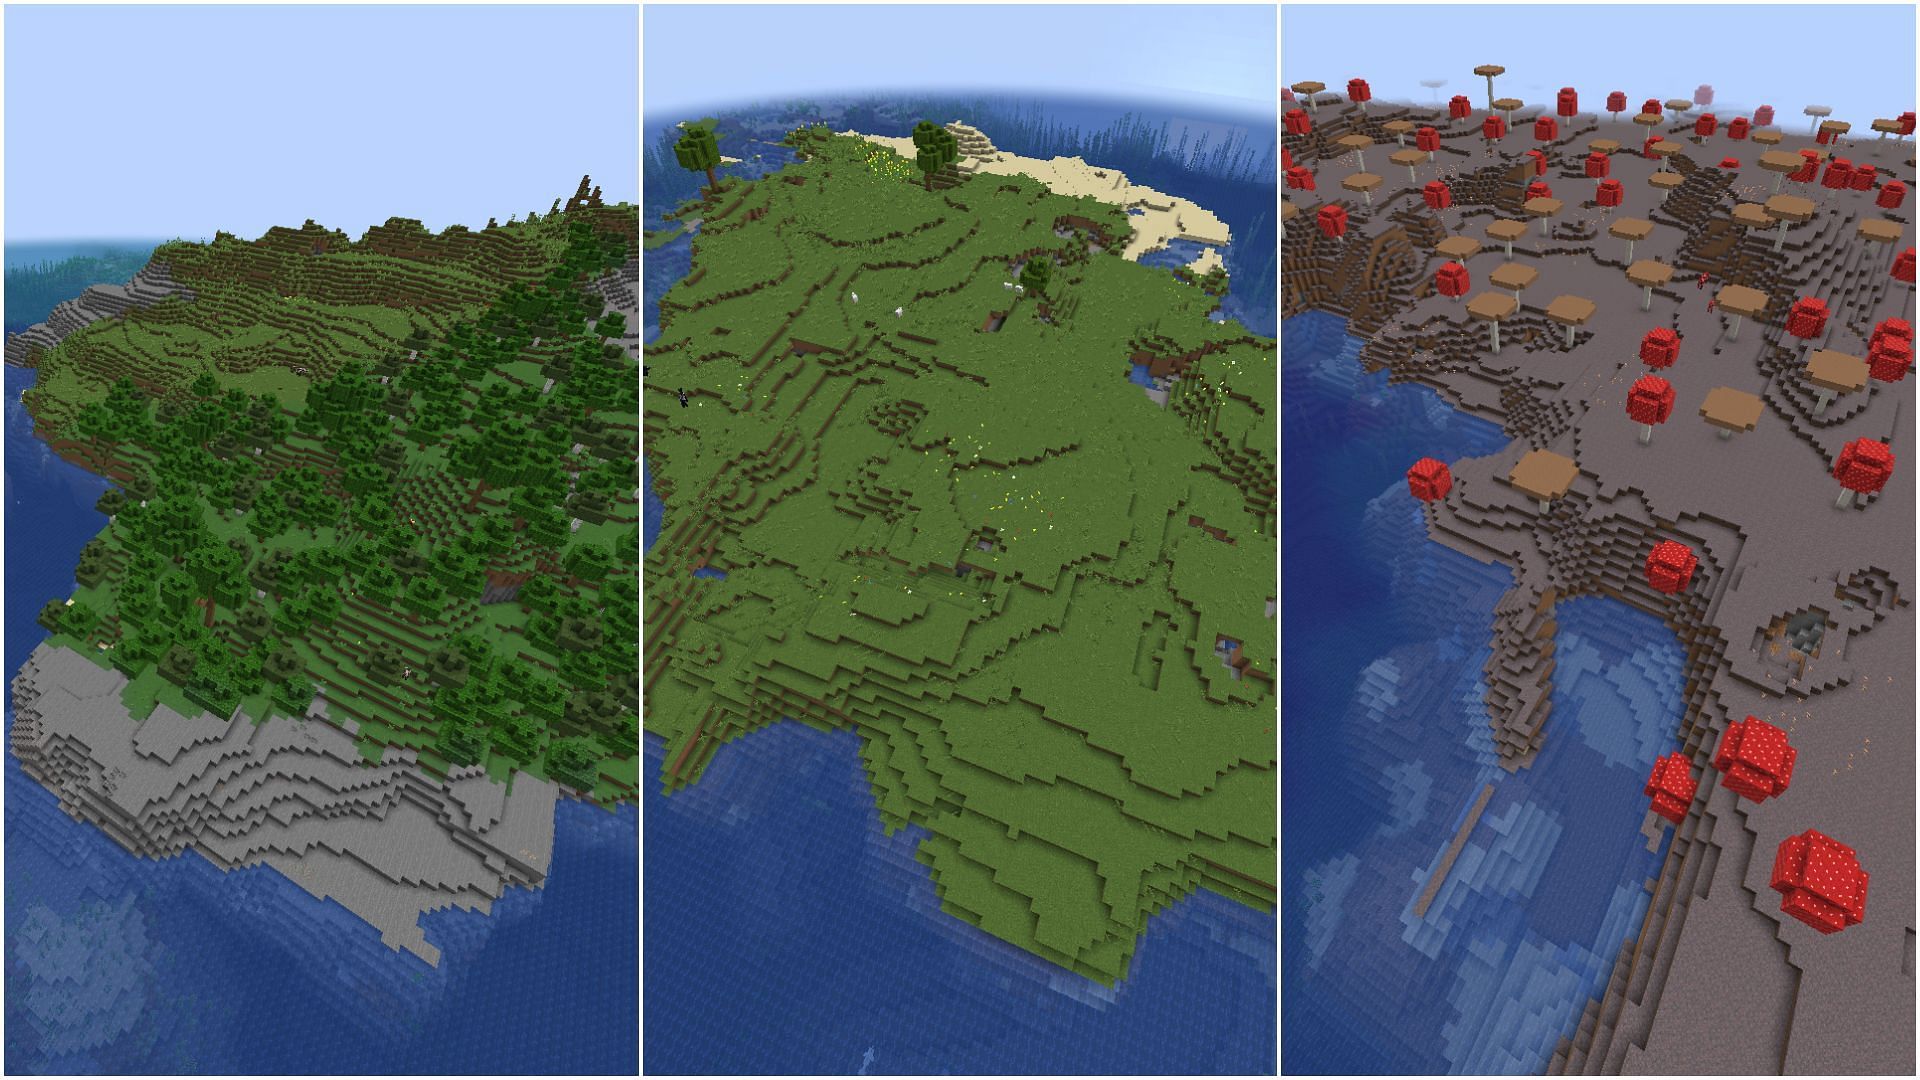 Players can use these seeds to spawn or explore islands in Minecraft (Image via Sportskeeda)